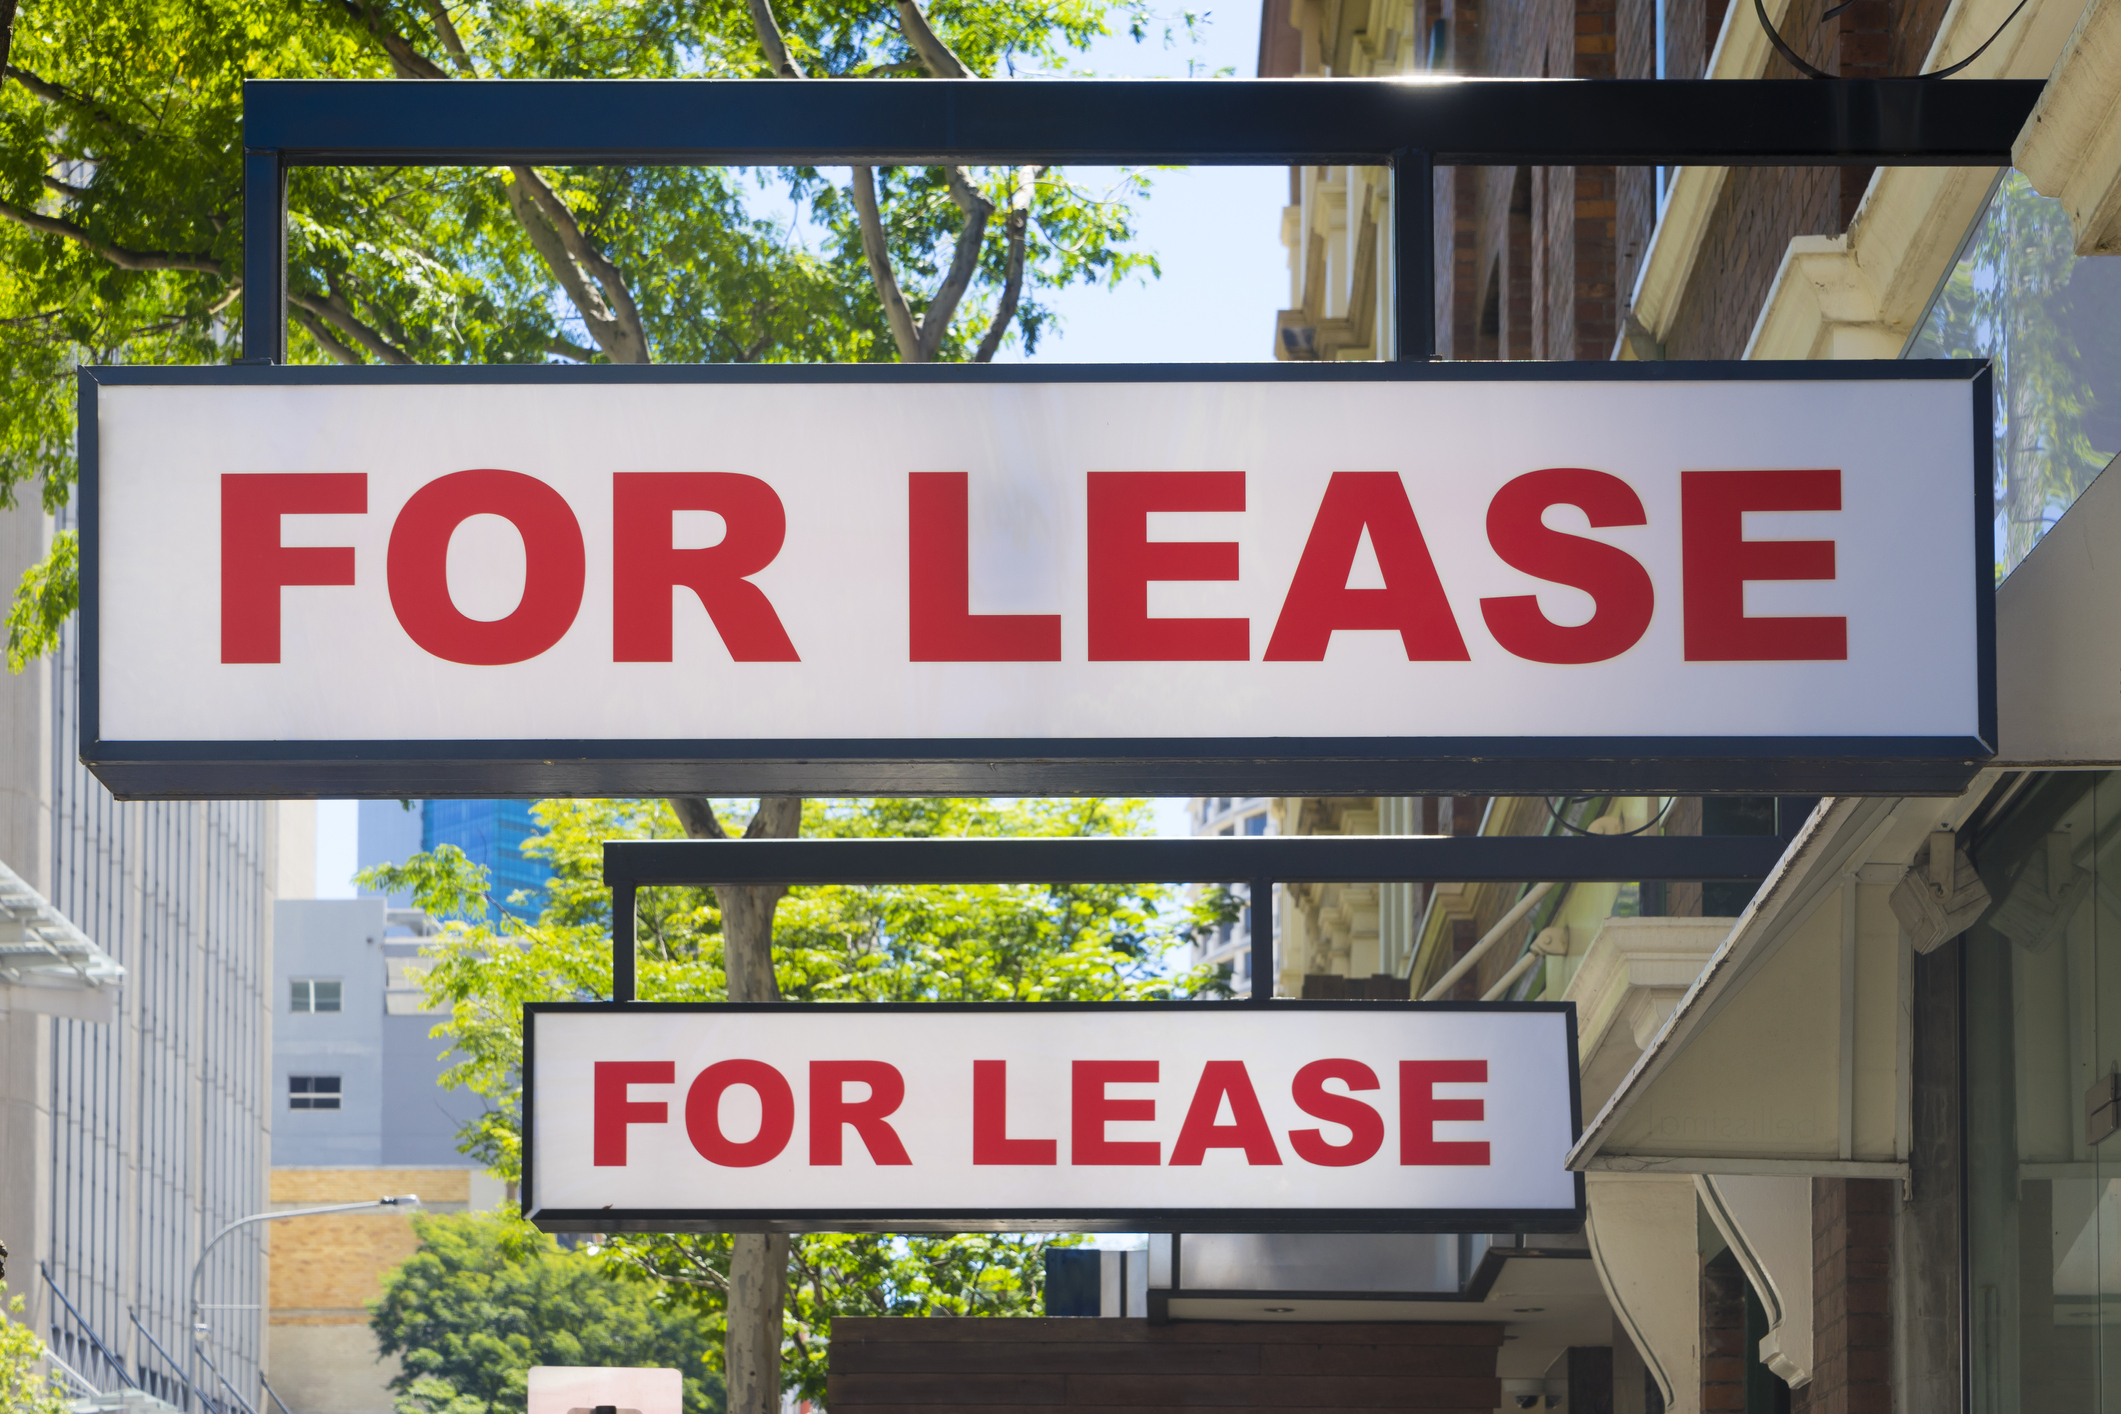 What Does Lease Mean in Retail?